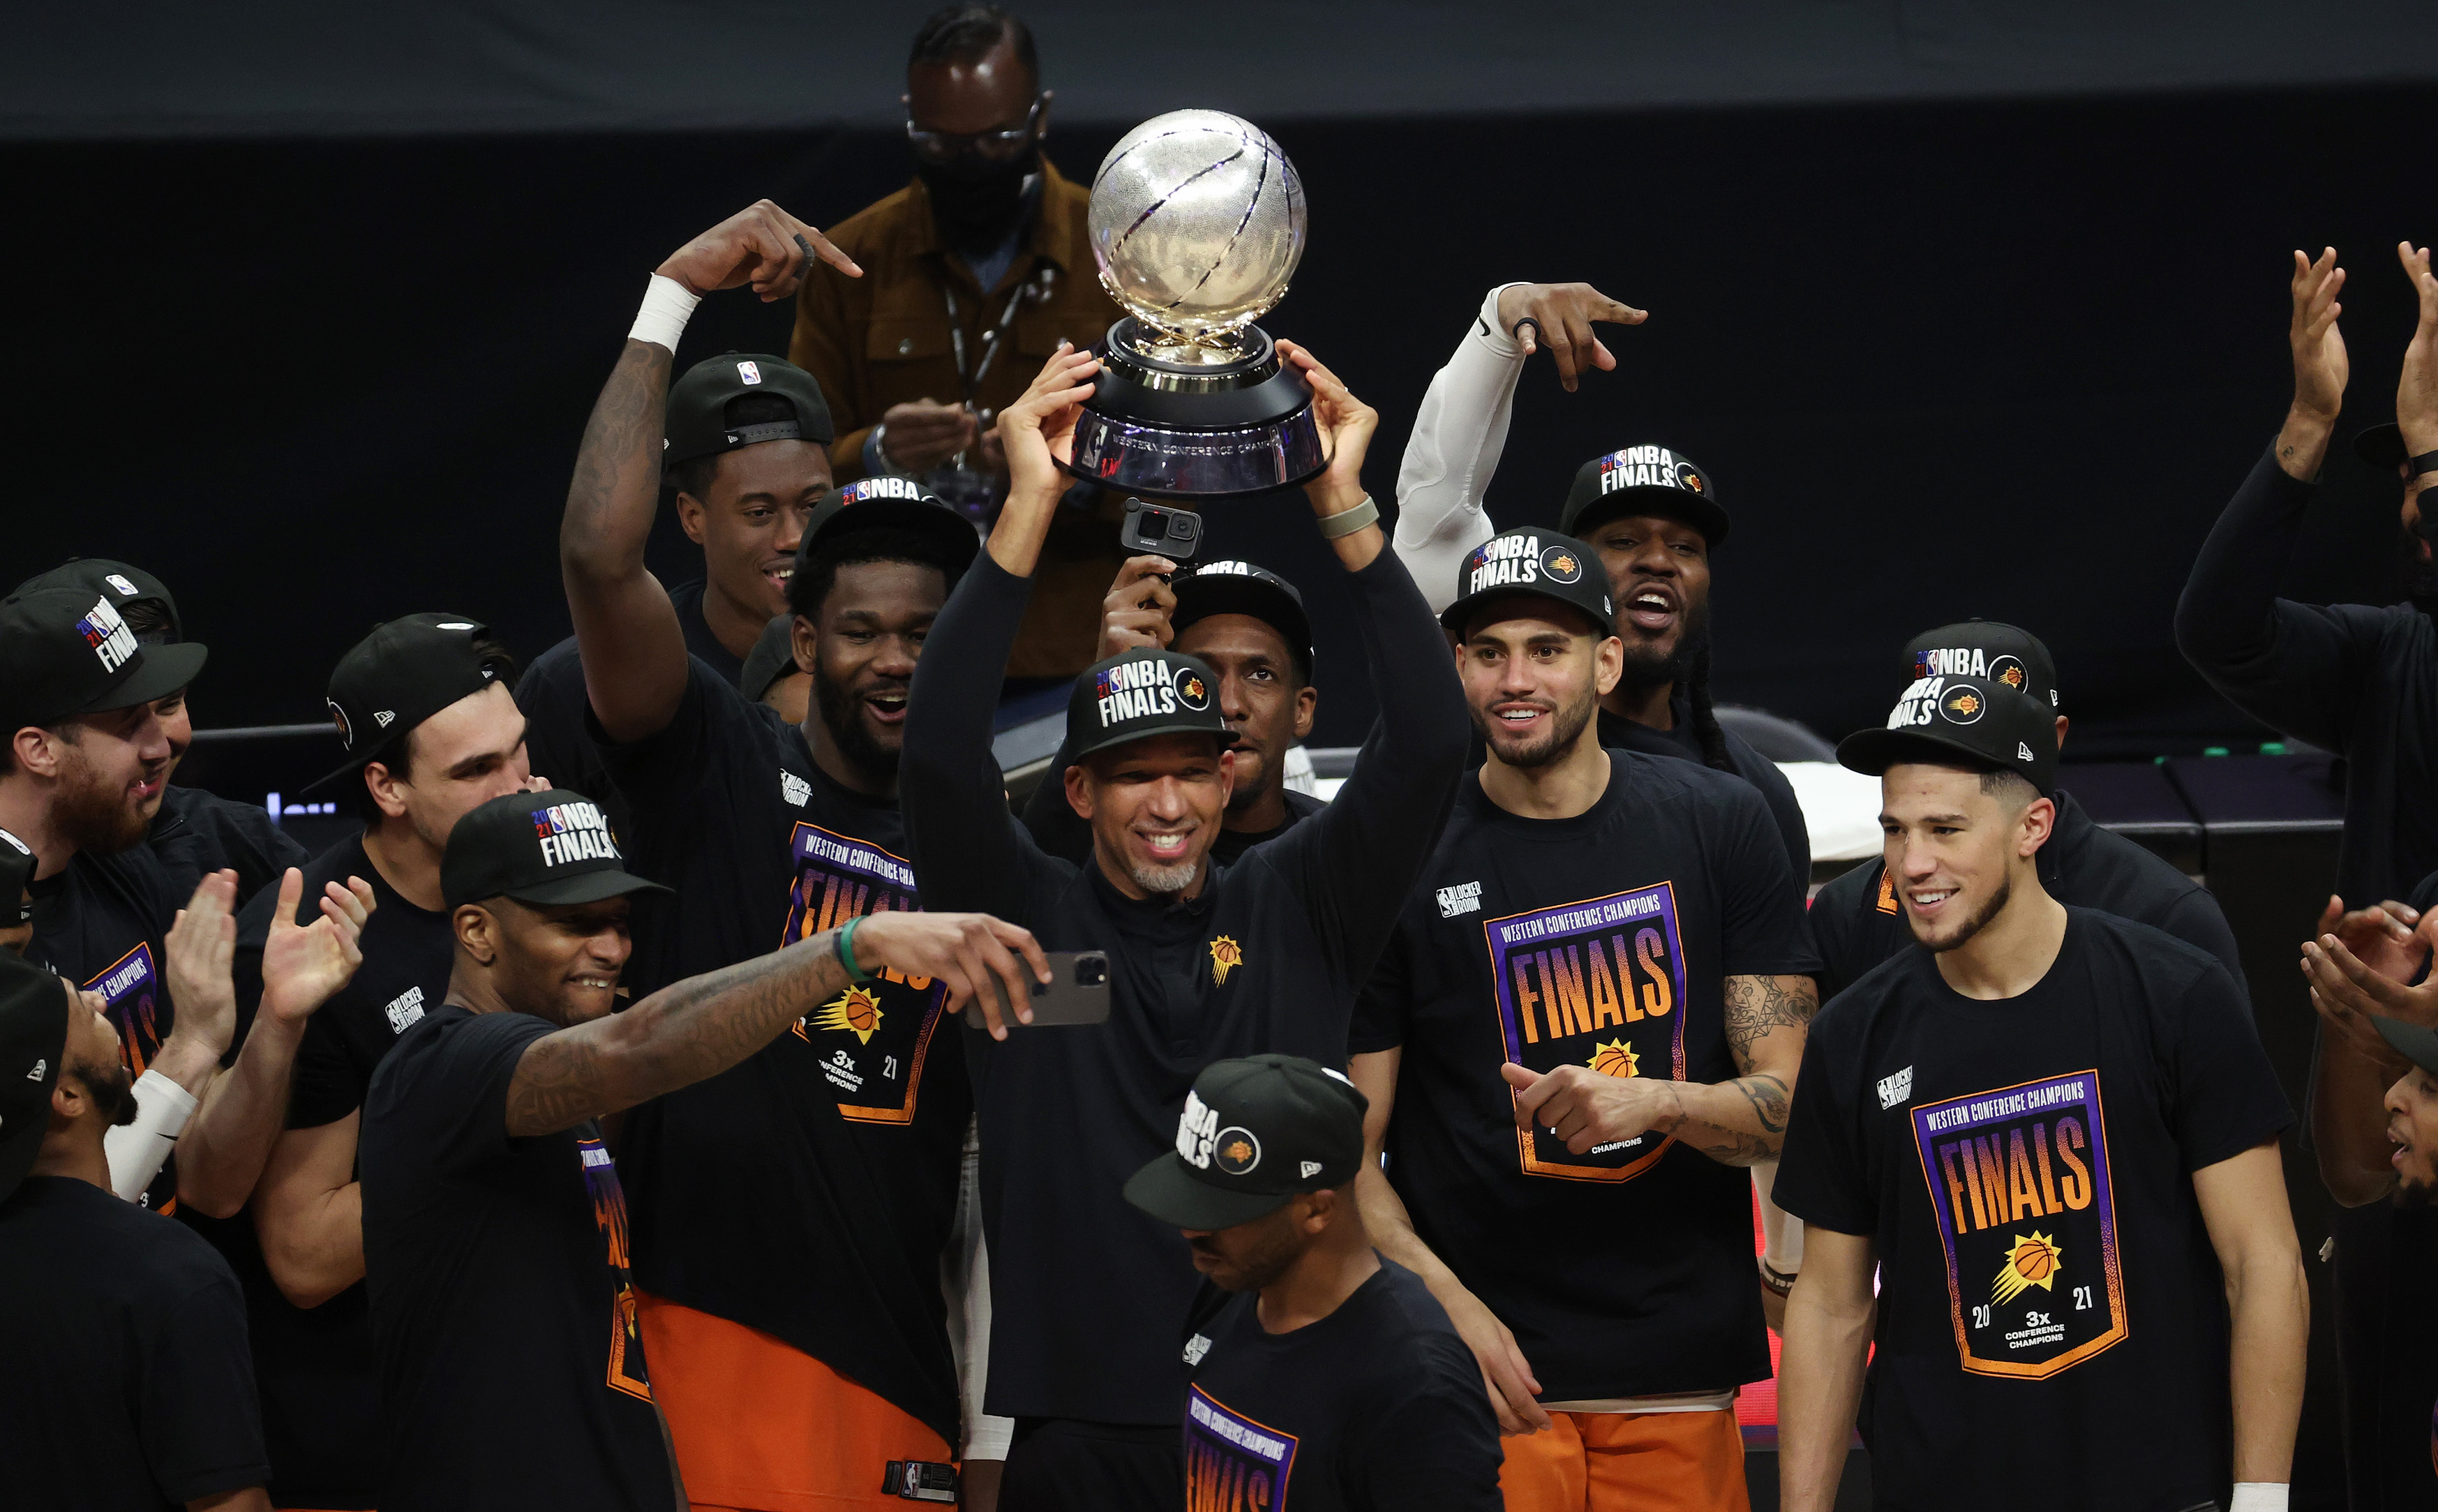 Phoenix Suns Headed to First N.B.A. Finals in Almost 30 Years